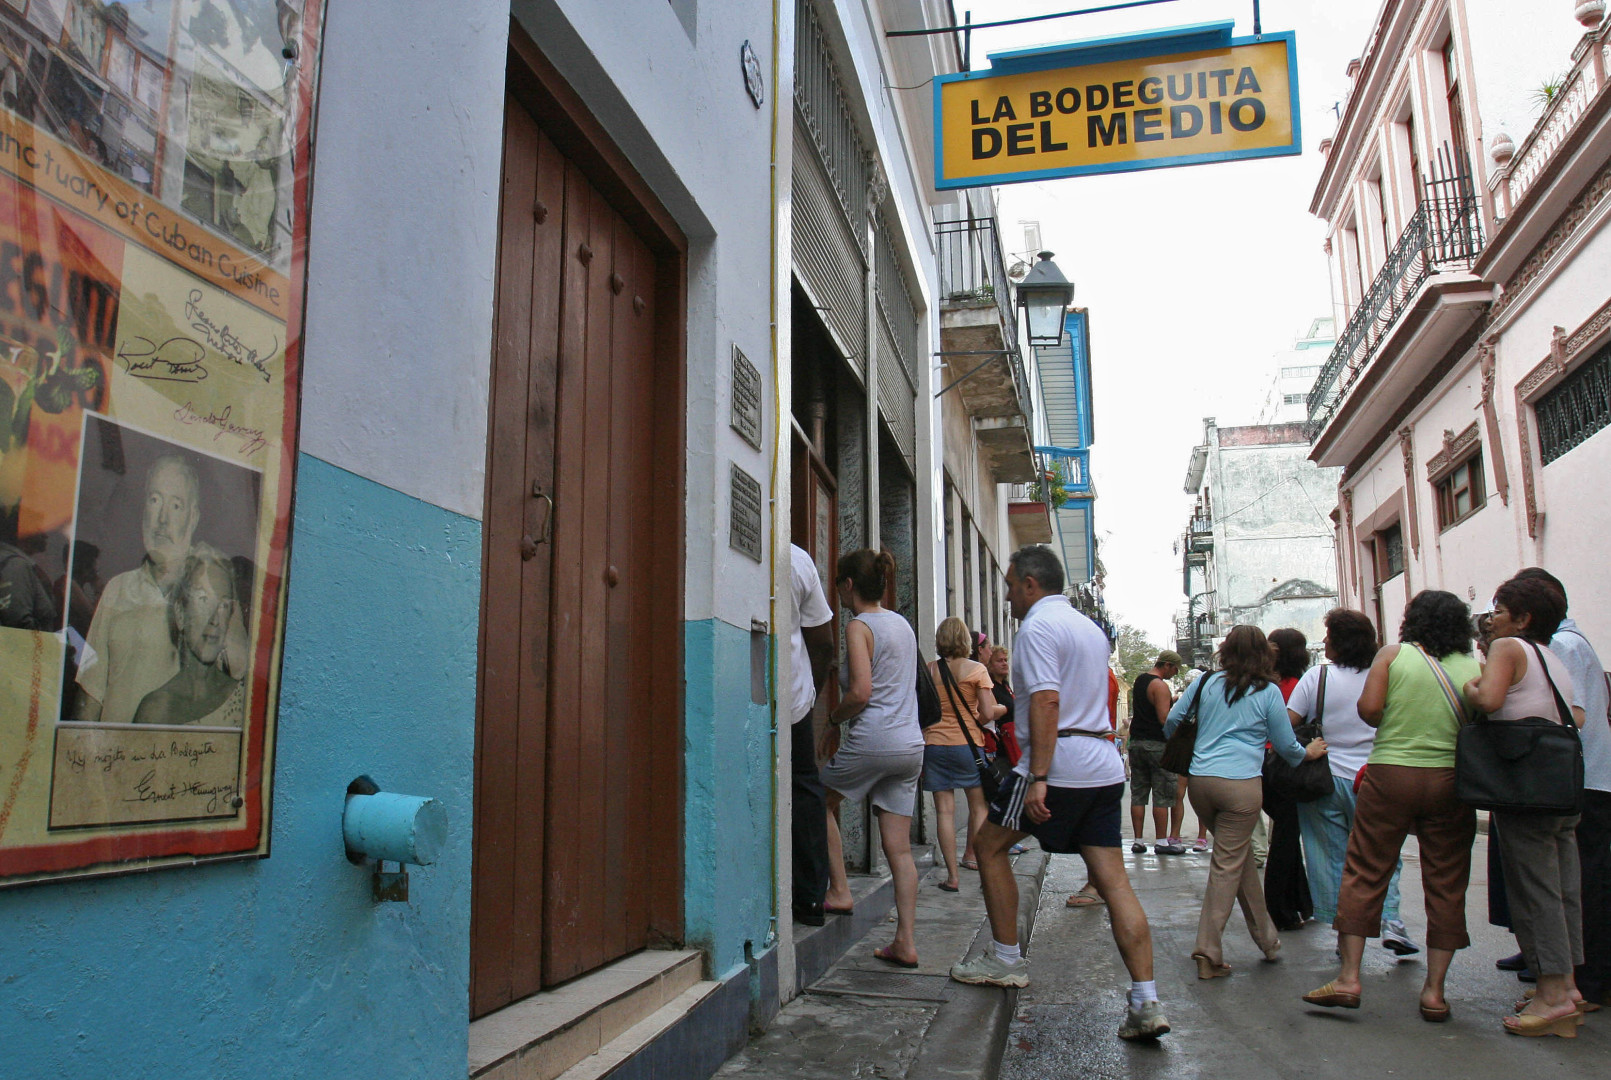 Tourists enter the Bodeguita del Medio -strongly linked to Ernest Hemingway's life in Cuba- on February 3, 2007, in Havana. (AFP PHOTO/Adalberto ROQUE)